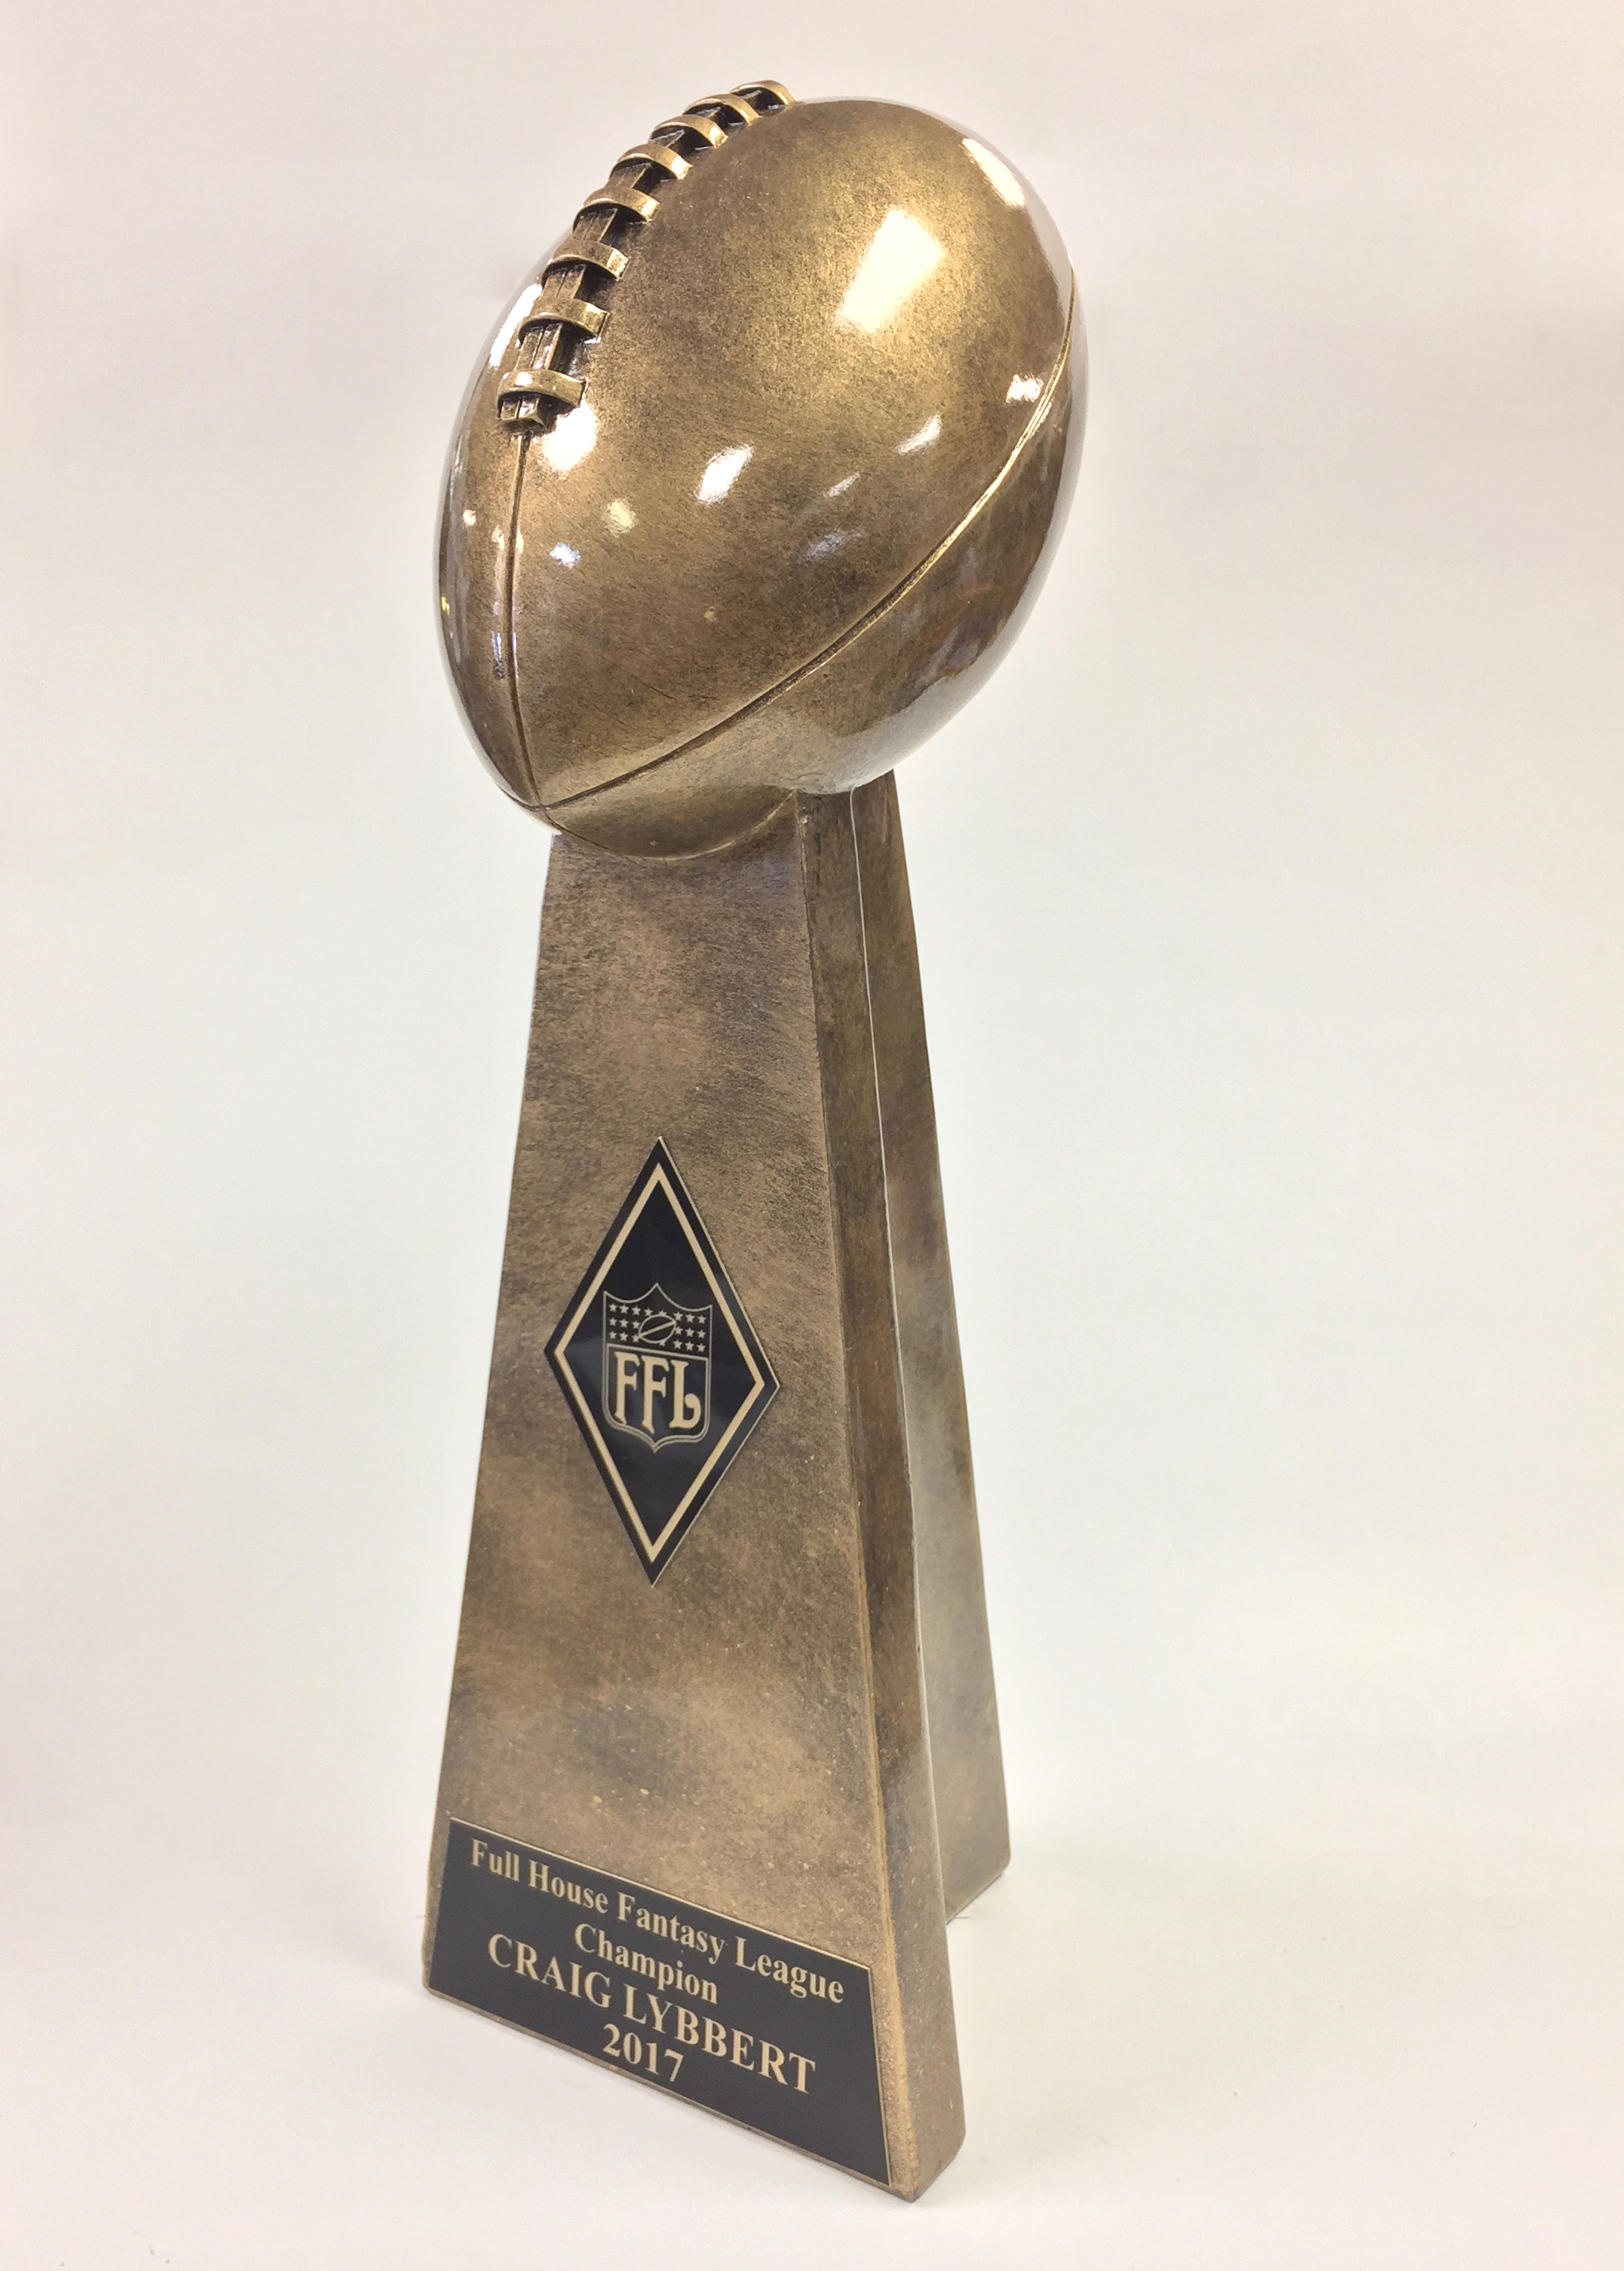 Fantasy Football trophy about 15" high Lombardi style award 